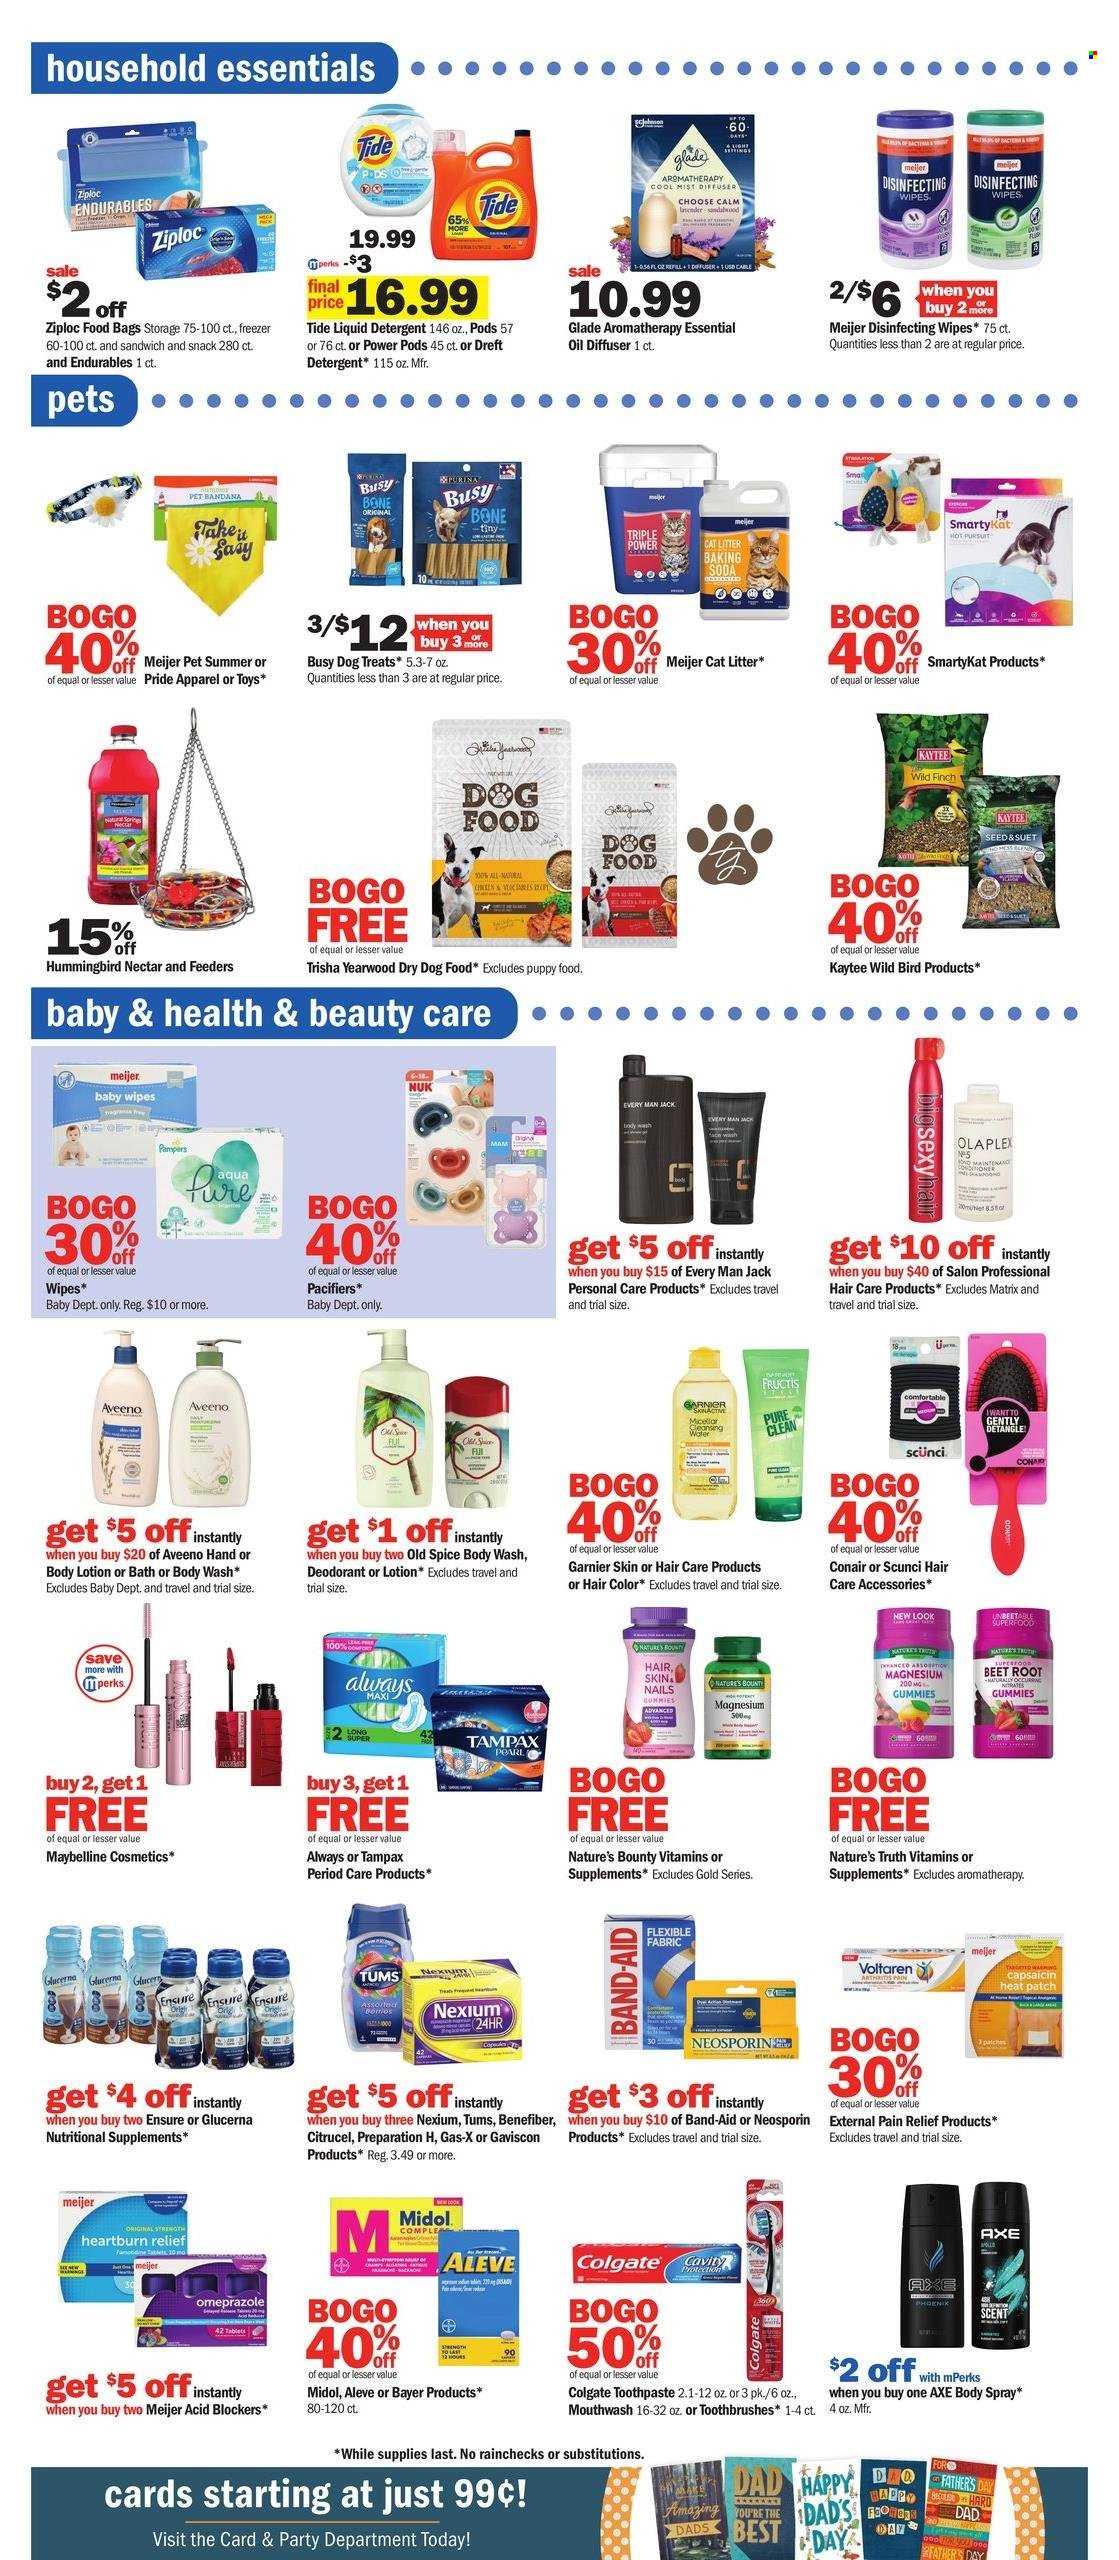 thumbnail - Meijer Flyer - 06/04/2023 - 06/10/2023 - Sales products - sandwich, snack, suet, bicarbonate of soda, water, cleansing wipes, wipes, Pampers, baby wipes, Nuk, Aveeno, detergent, Tide, liquid detergent, body wash, Old Spice, Colgate, toothpaste, mouthwash, Tampax, Garnier, hair color, Scünci, Fructis, body lotion, body spray, anti-perspirant, deodorant, Axe, Ziploc, Maybelline, jar, diffuser, Glade, cat litter, dry dog food, Kaytee, animal food, animal treats, Purina, toys, pain relief, Aleve, magnesium, Nature's Bounty, Nature's Truth, Neosporin, Glucerna, Nexium, Gaviscon, Bayer, dietary supplement, Voltaren, bag, sandwich bag, freezer bag, pet toy, feeder, bird feeder, dog food, pacifier, acid blocker, toothbrush, greeting card. Page 15.